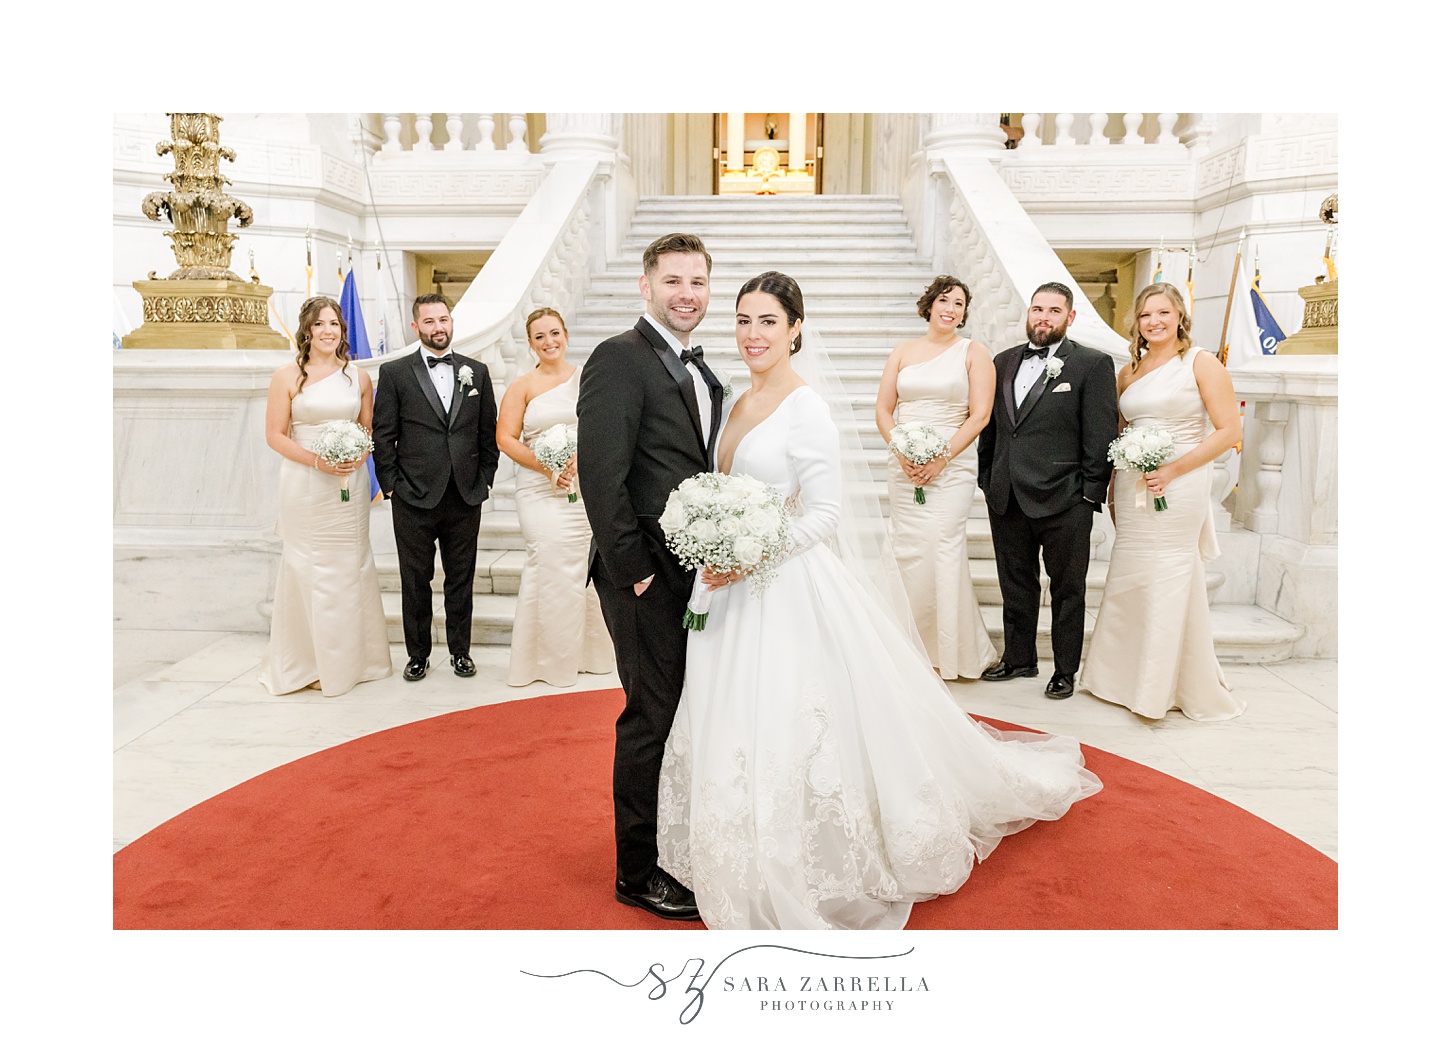 bride and groom hug in front of wedding party in ivory gowns and black tuxes